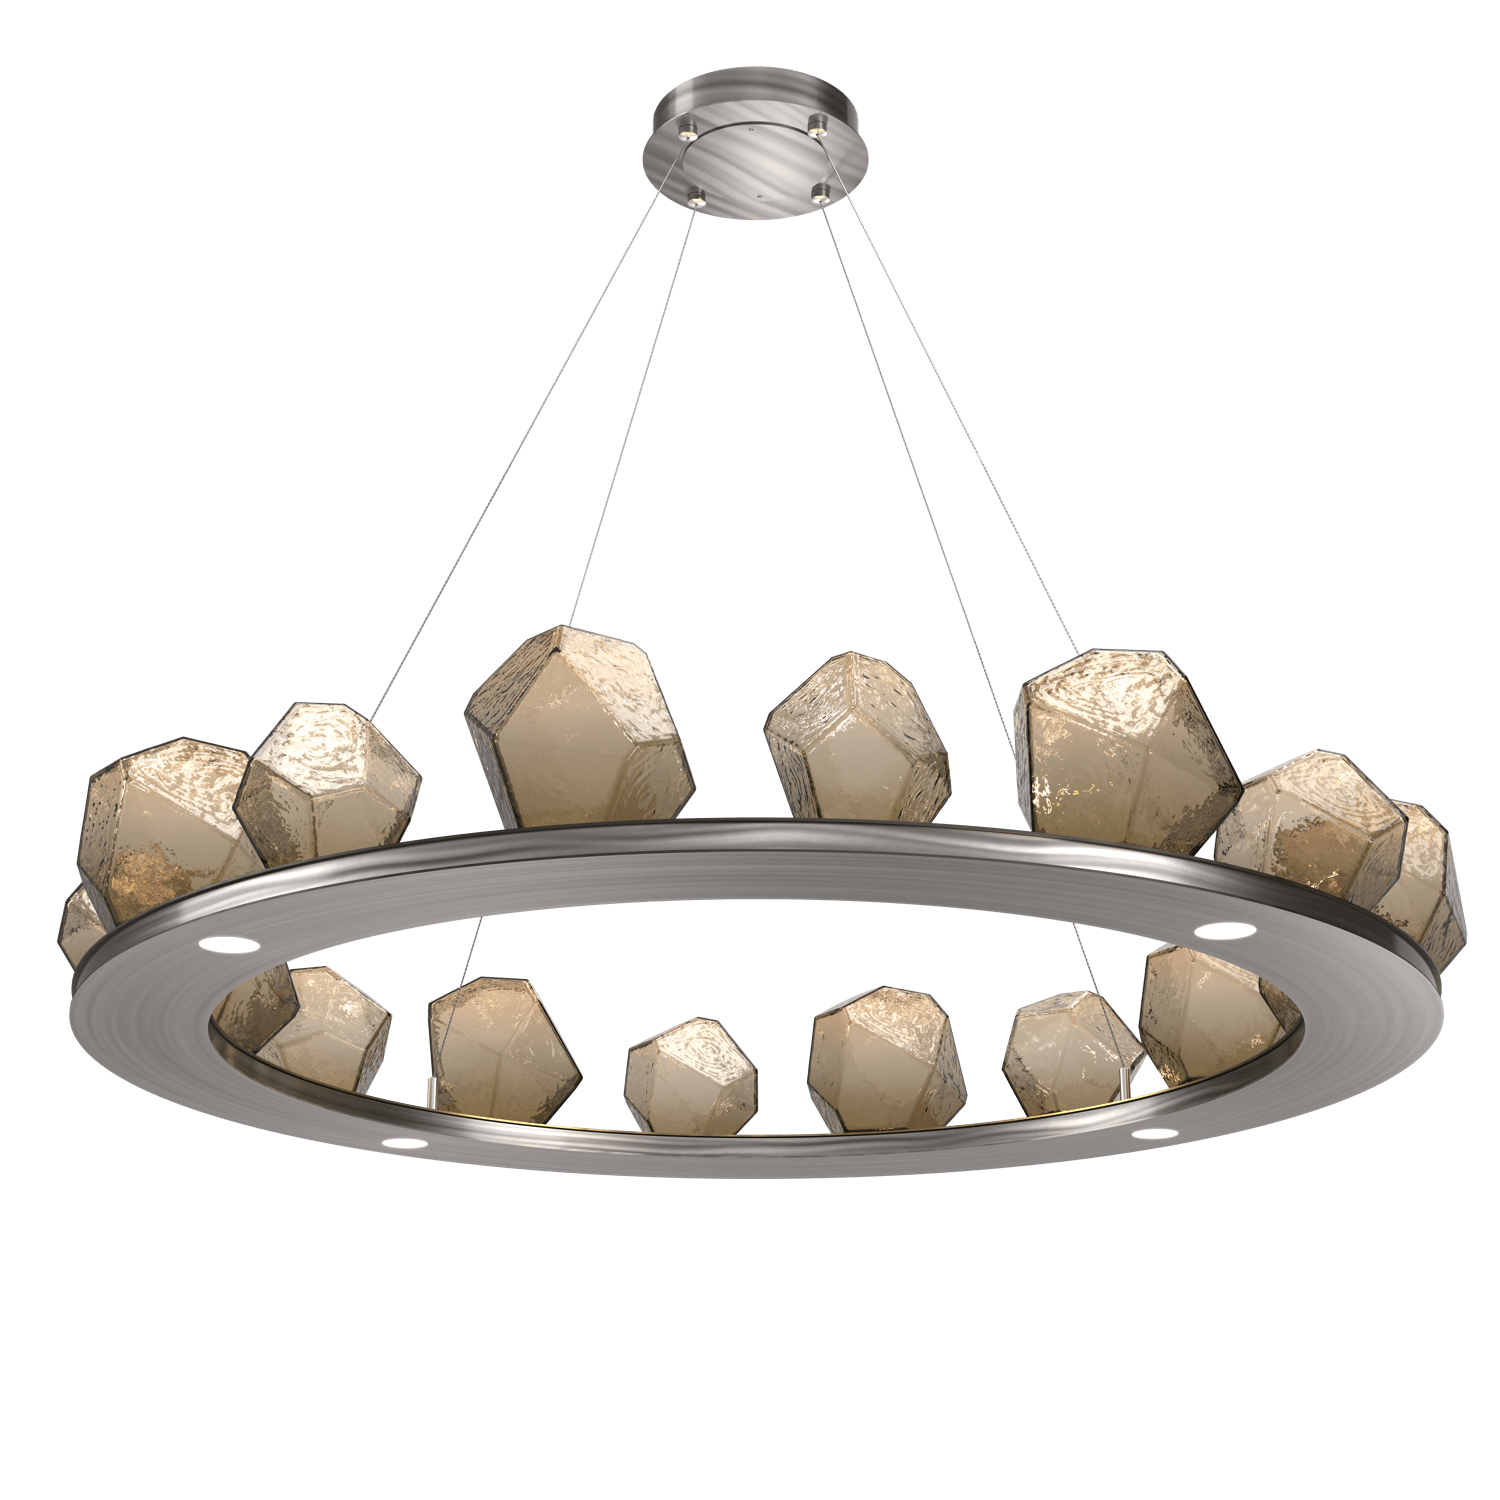 CHB0039-0D-GM-B-Hammerton-Studio-Gem-48-inch-ring-chandelier-with-gunmetal-finish-and-bronze-blown-glass-shades-and-LED-lamping